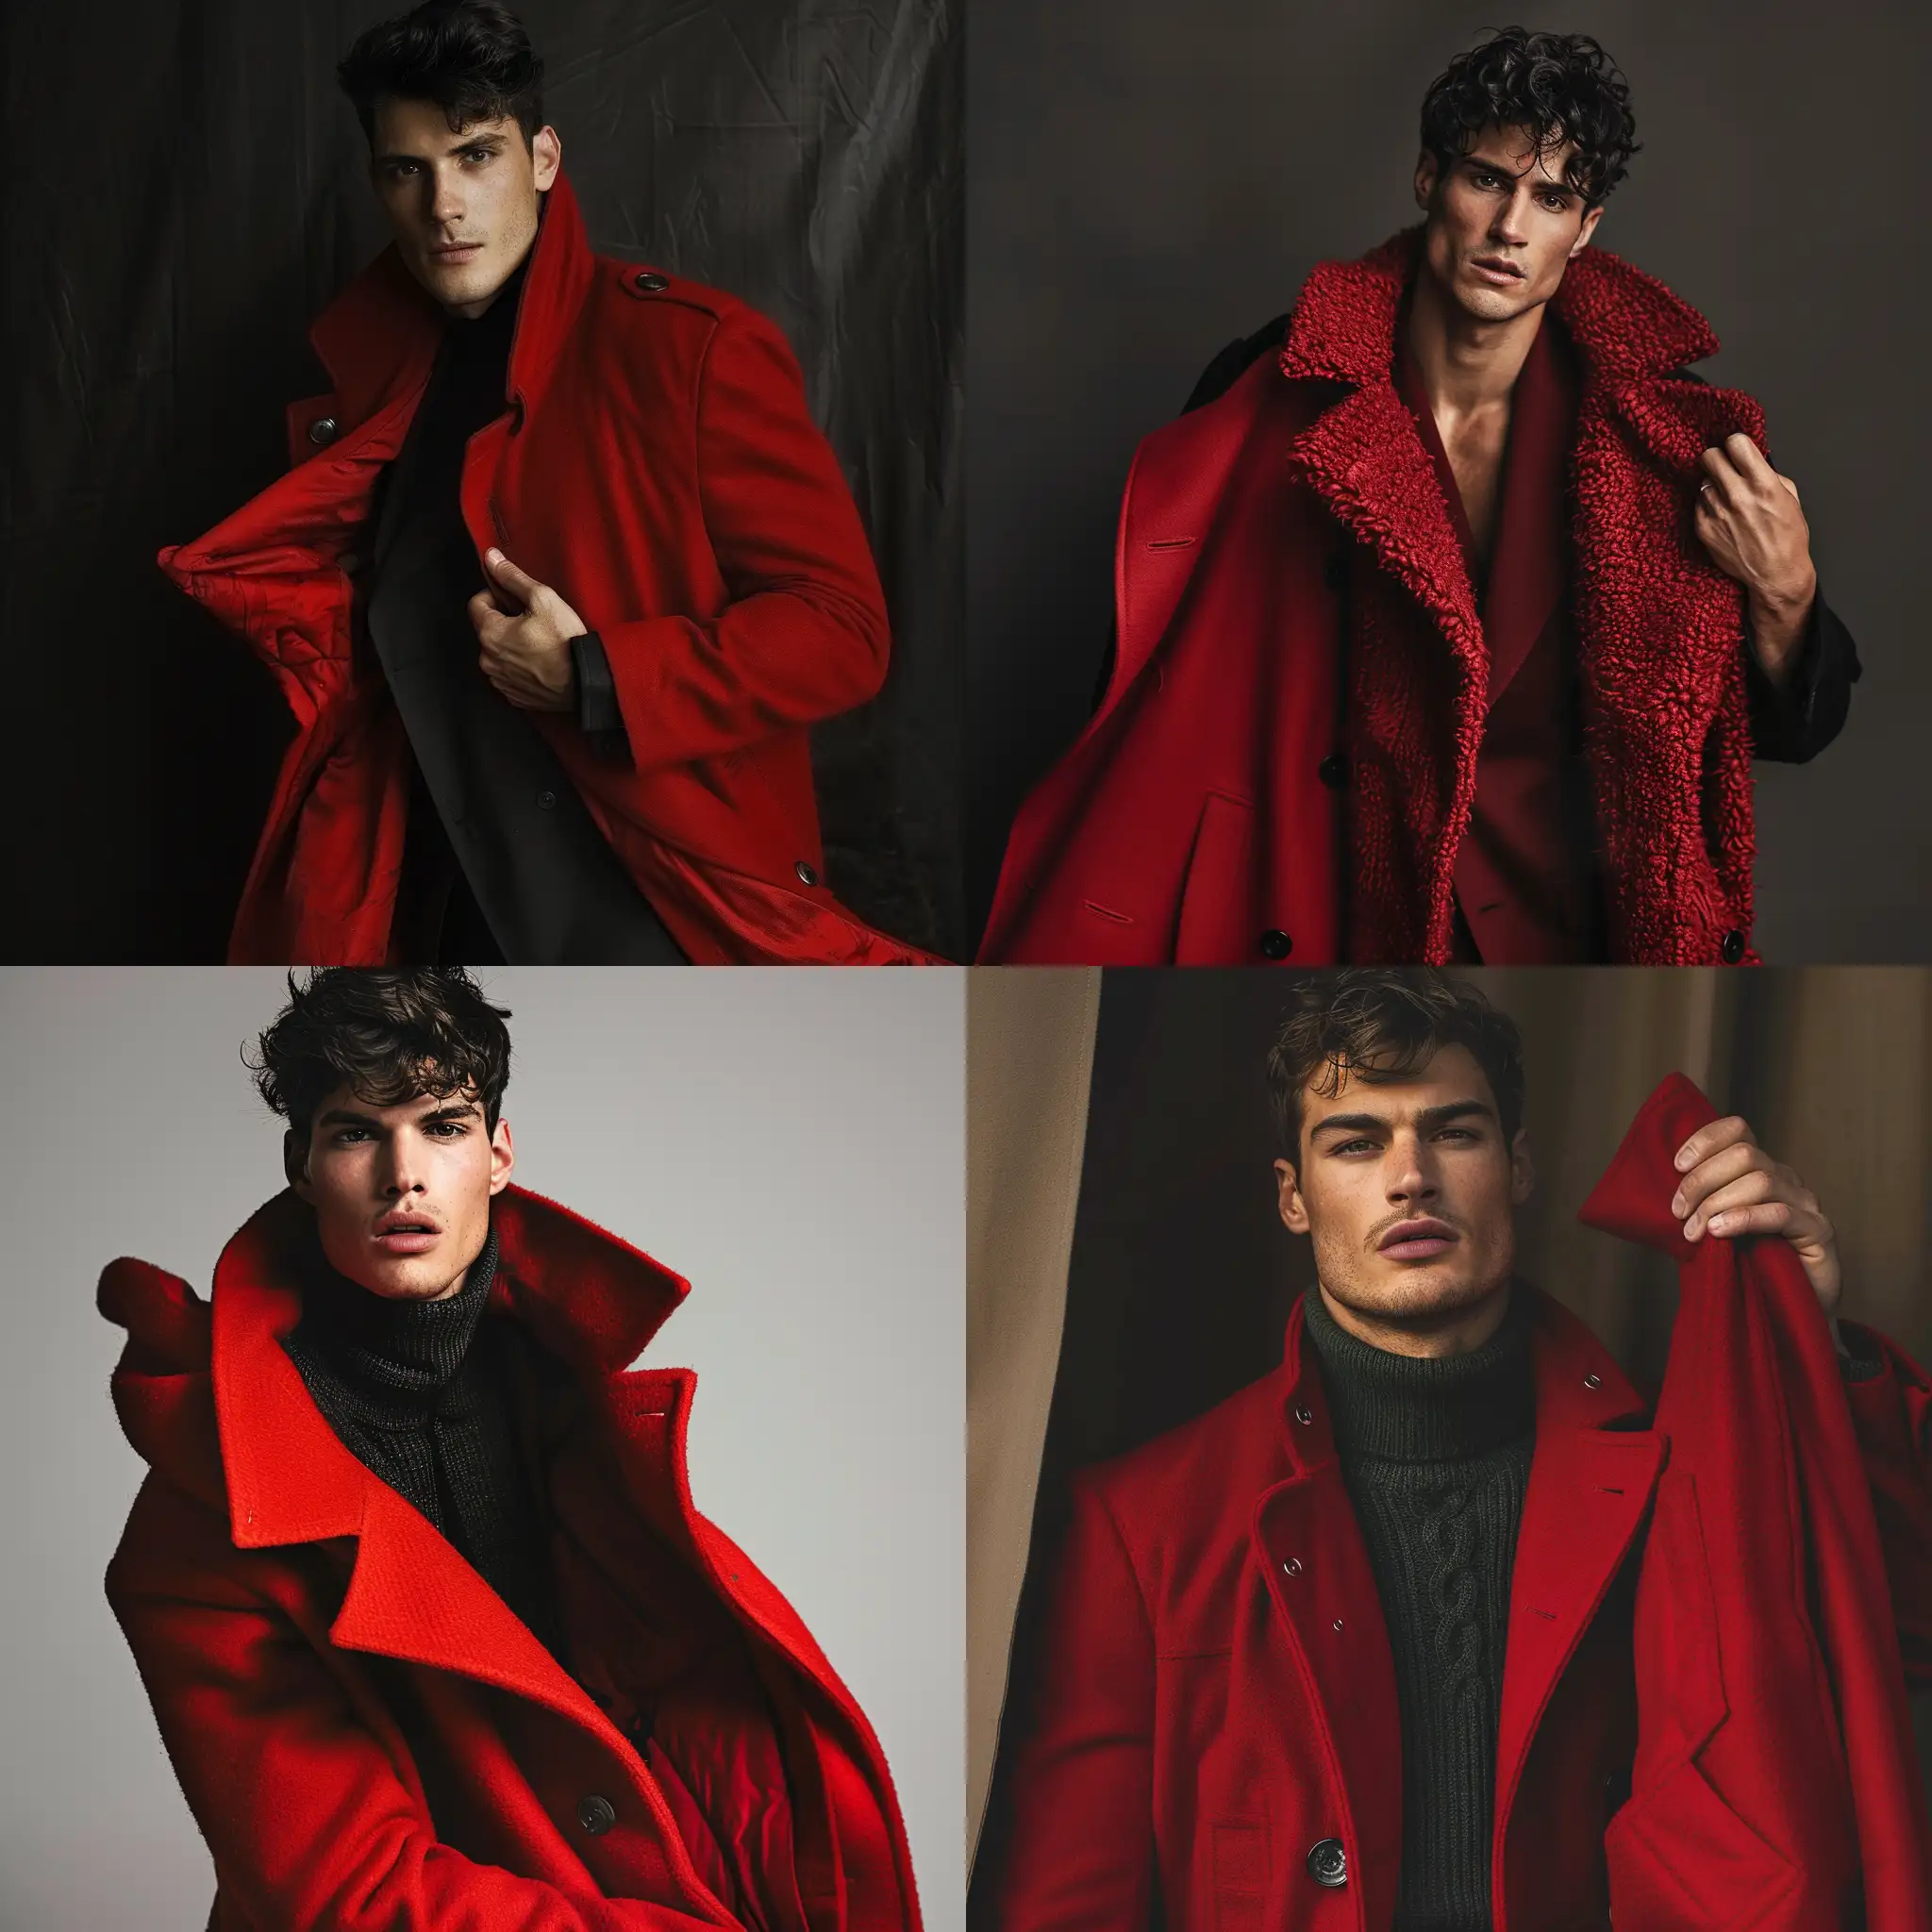 fashion disposable photo of a man exact to Dominique Toretto posing with a red coat, by Camilla Vivier